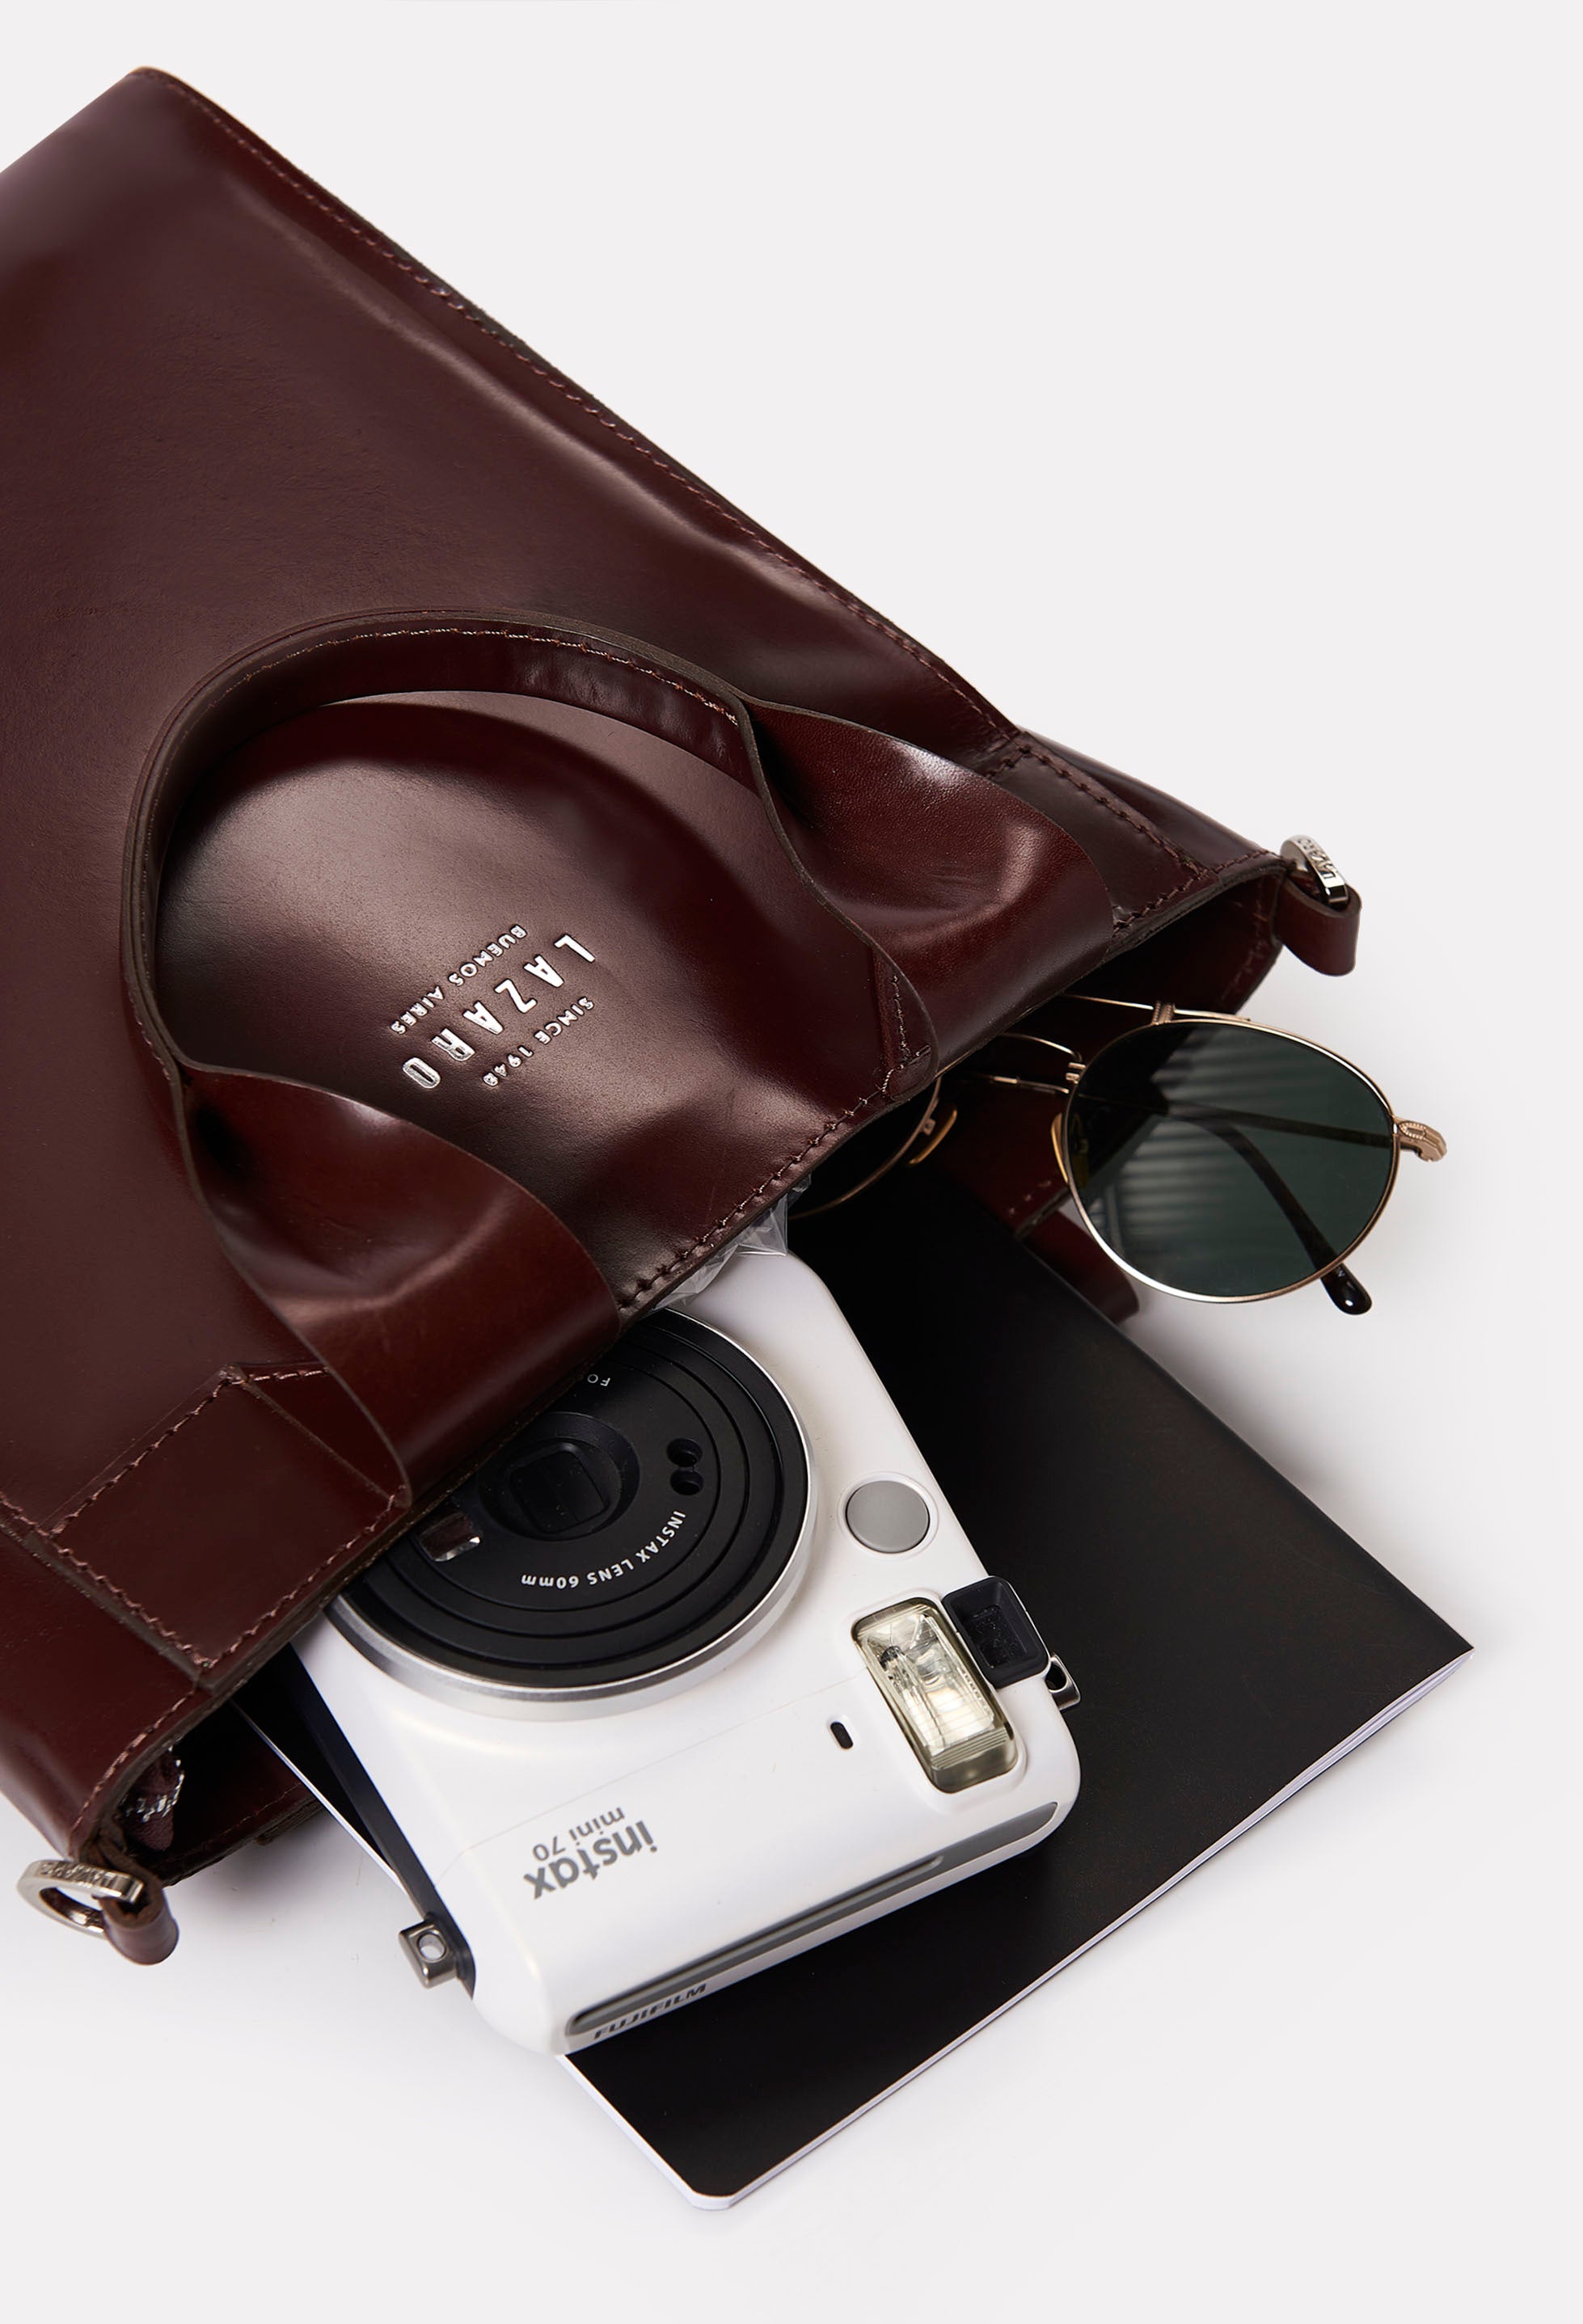 Interior of a Coffee Leather Mini Tote Bag Lambro that shows the bag packed with a camera, sunglasses and a notebook.